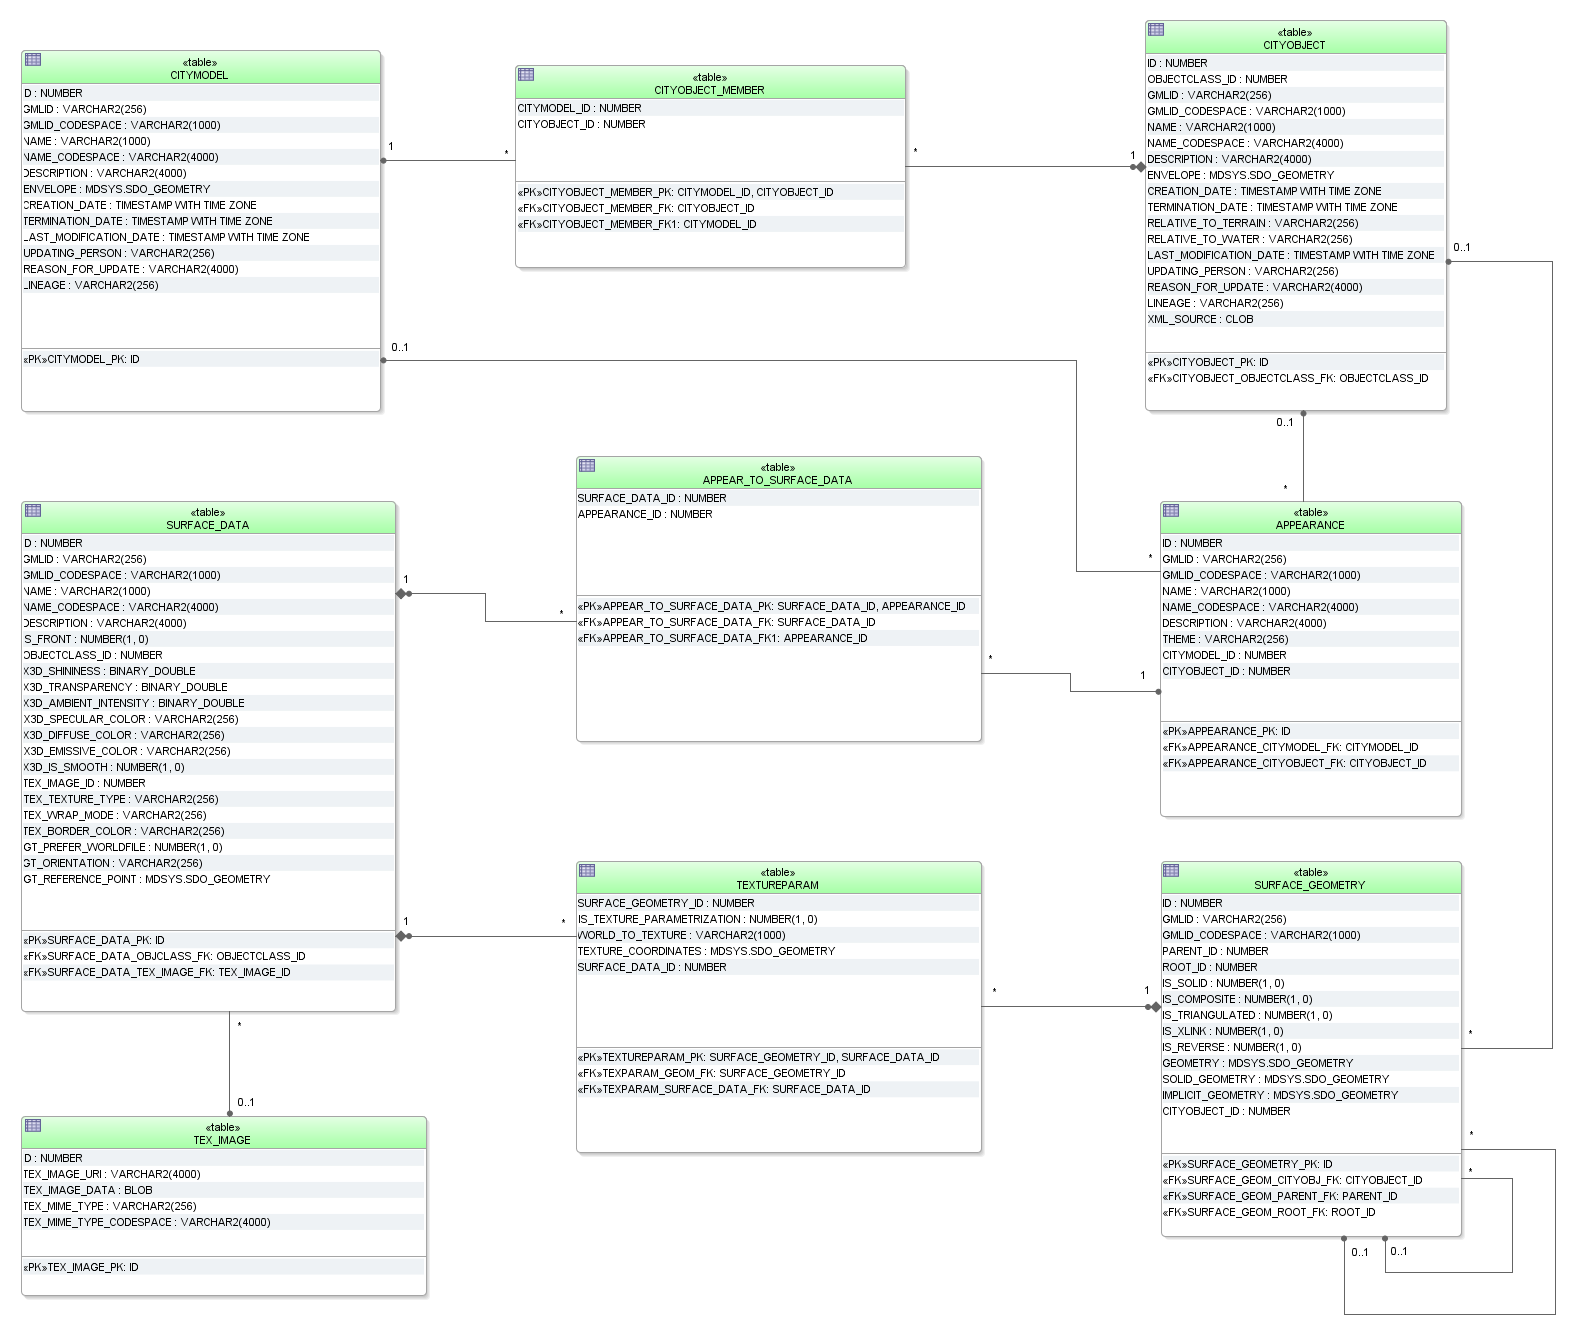 ../../_images/citydb_schema_appearance.png